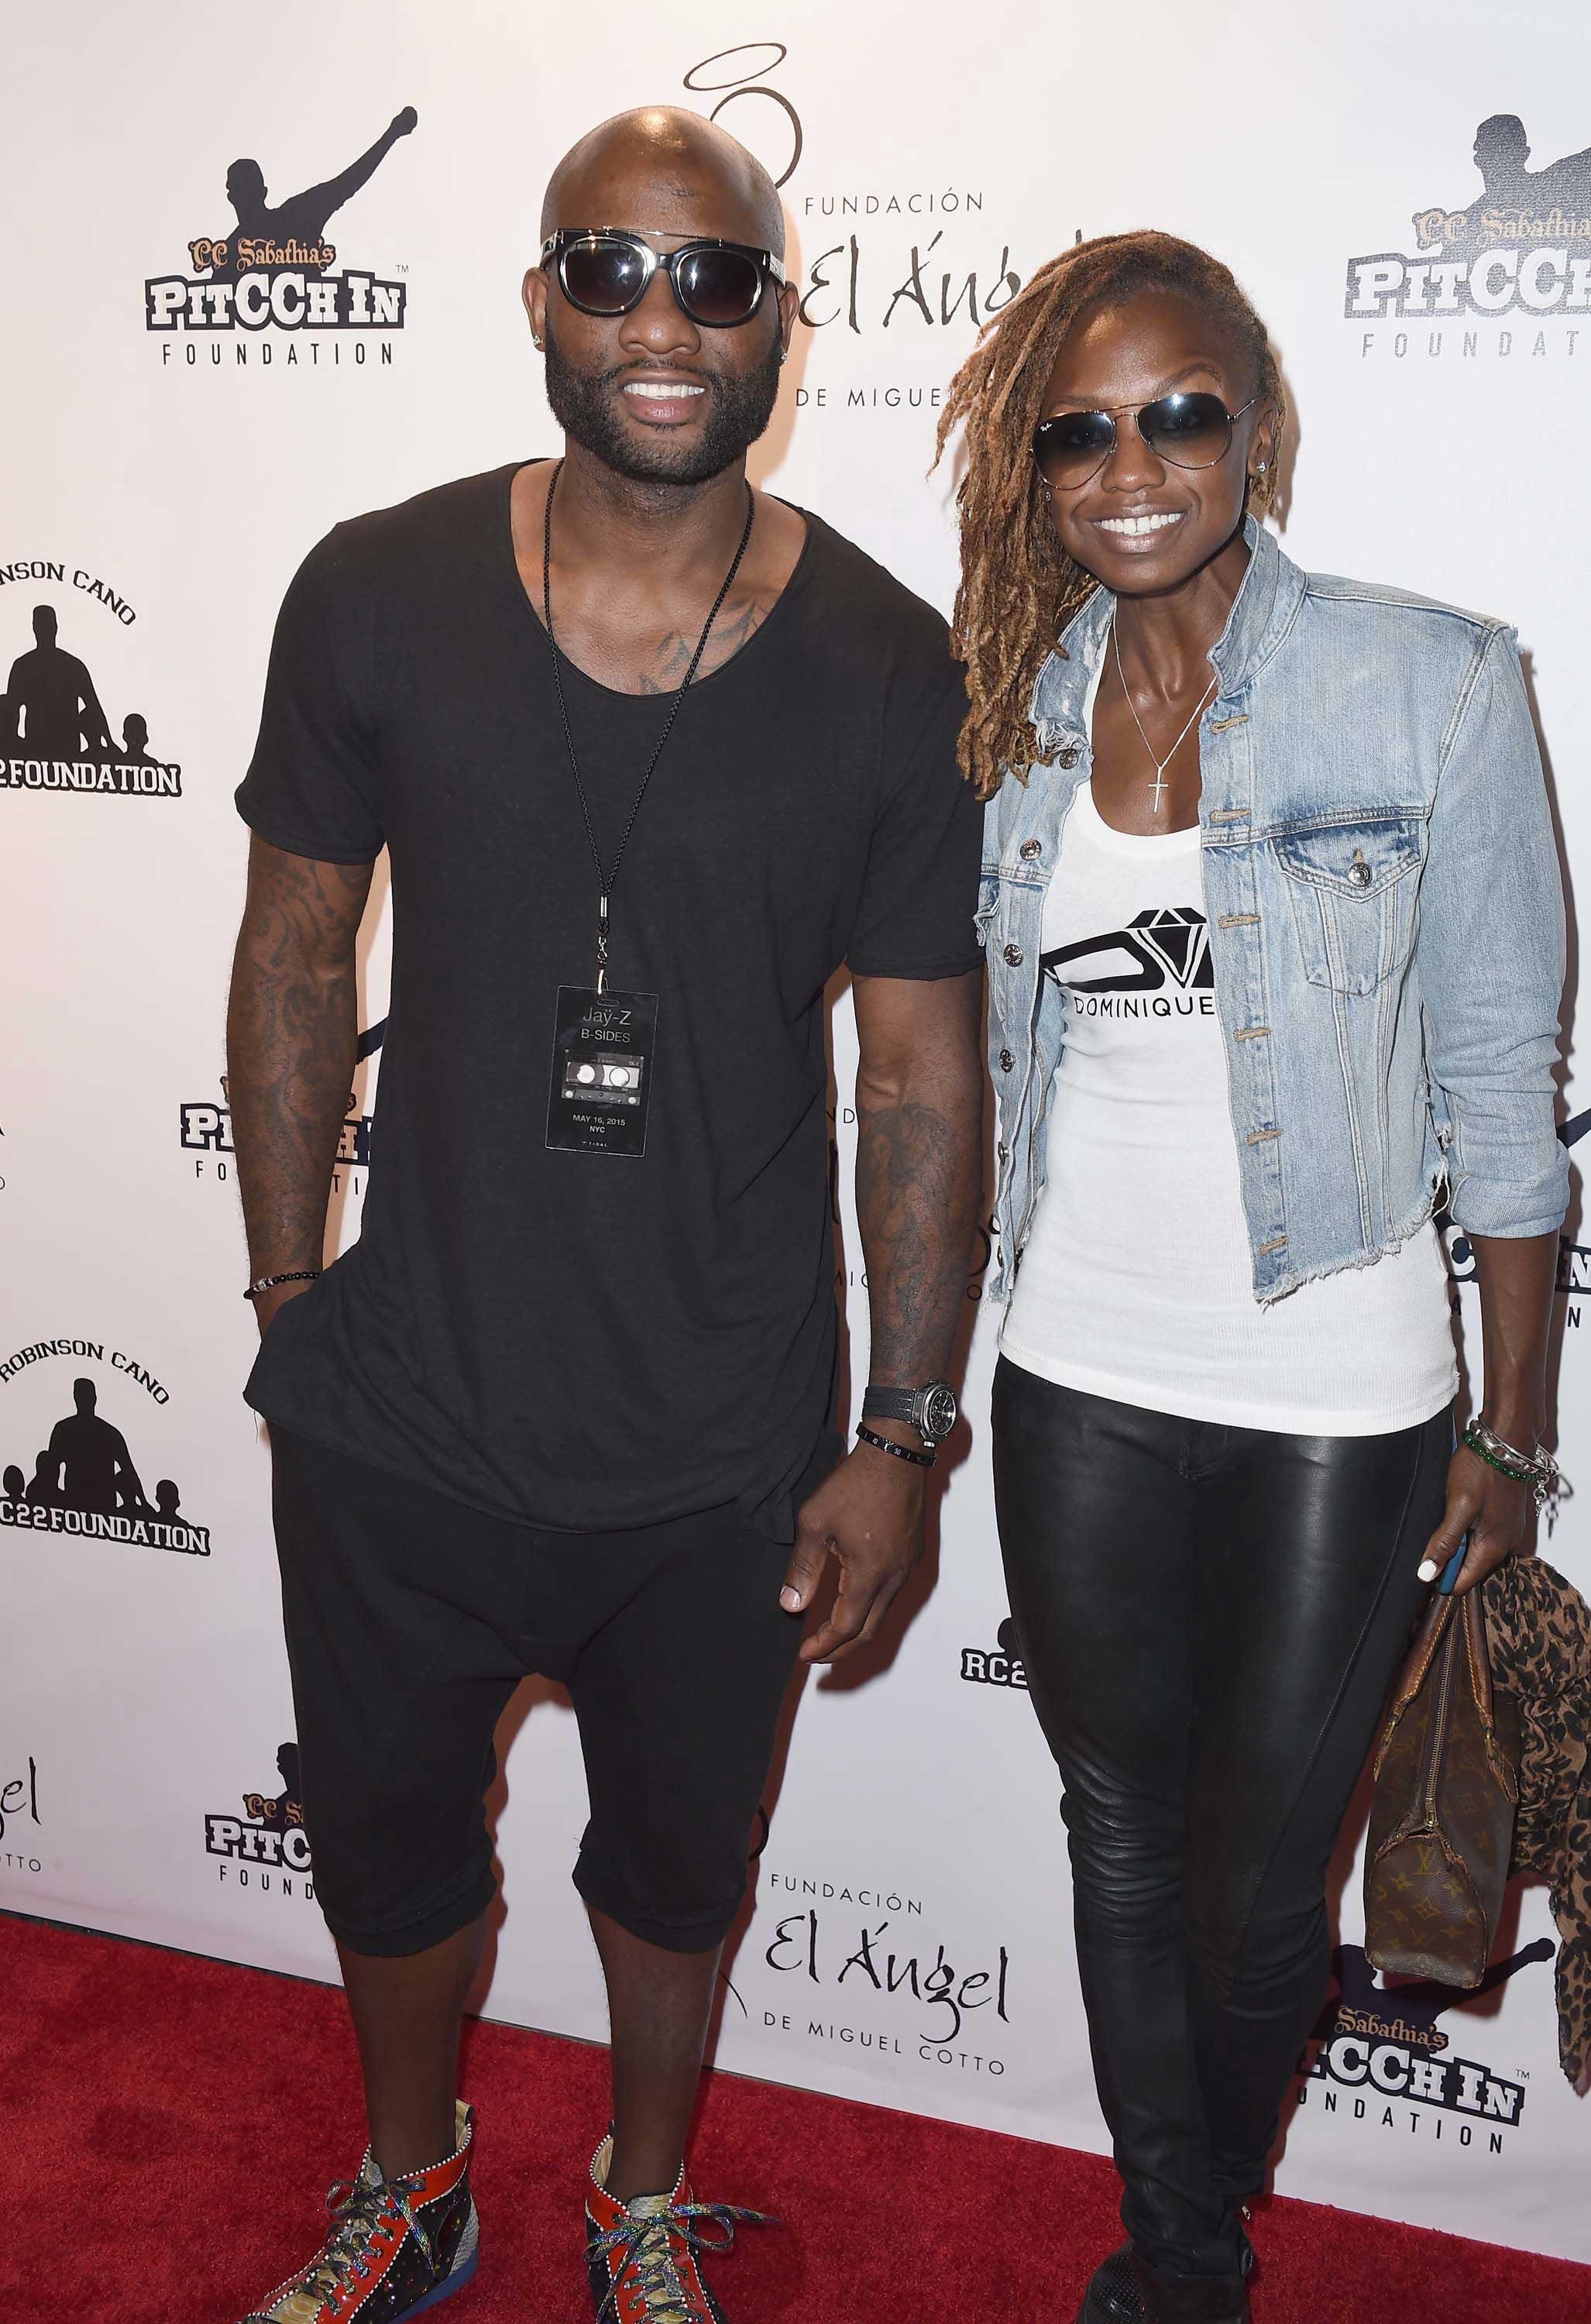 Dominique Blake attends the Roc Nation Summer Classic Charity Basketball